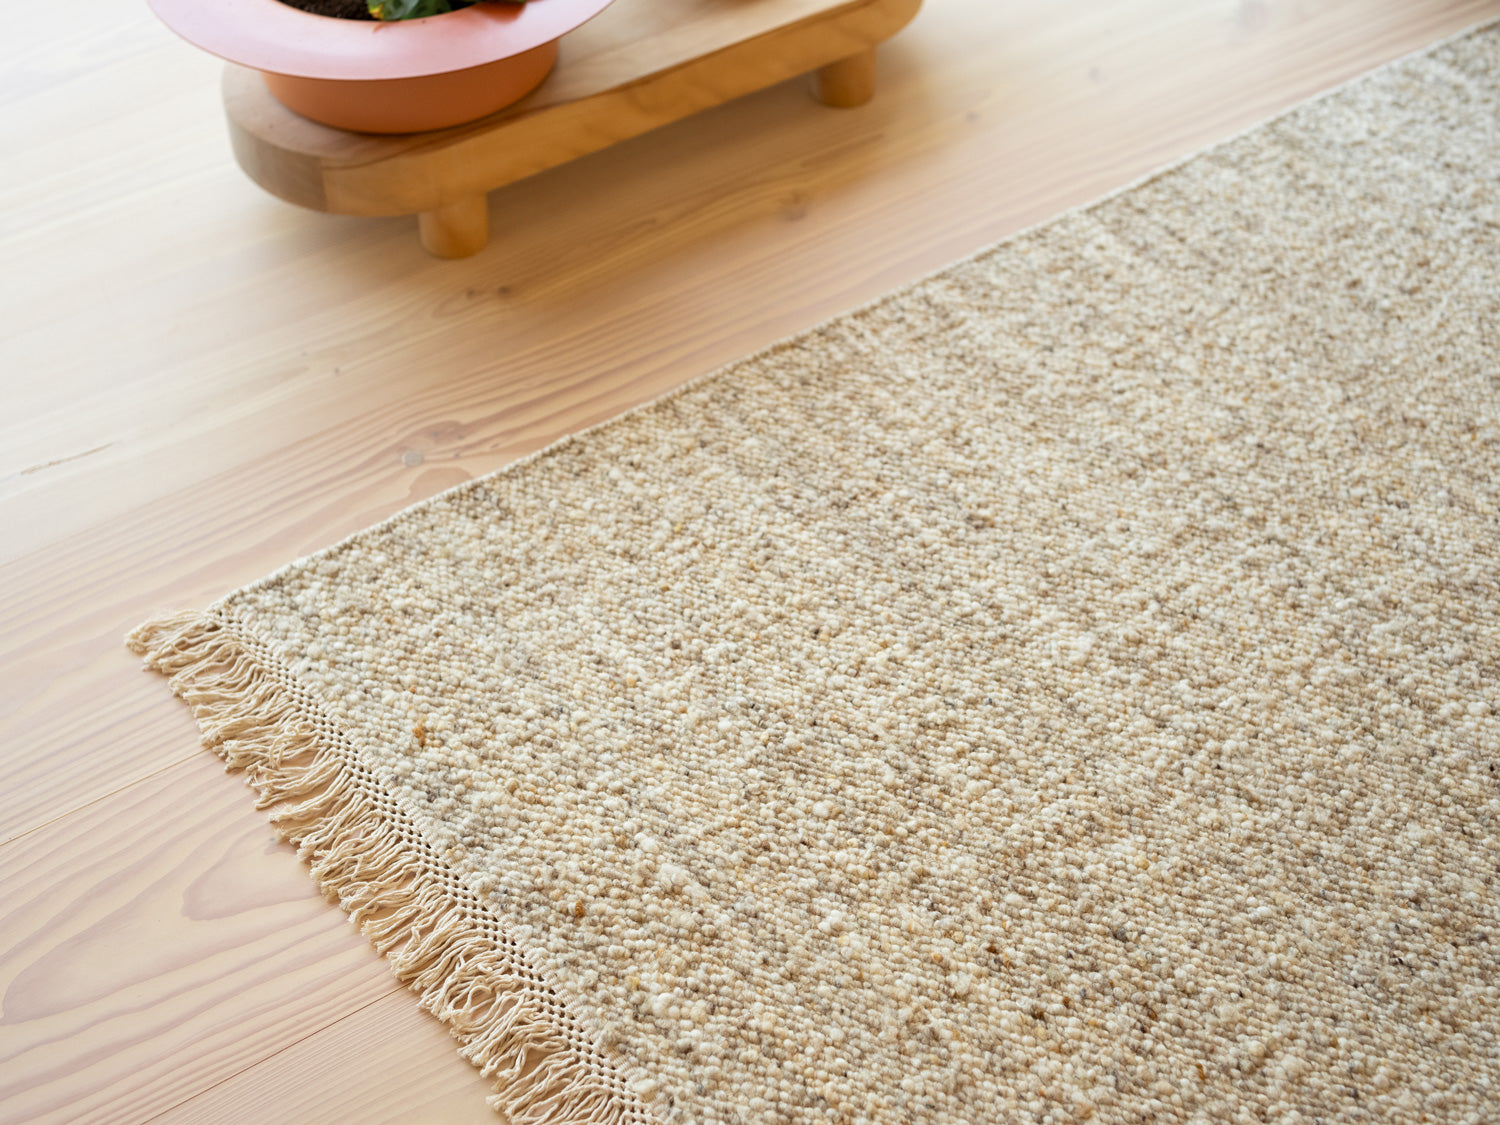 Wool and Jute Rugs  The Cotton Store NZ – The Cotton Store Floor Rugs &  Mats